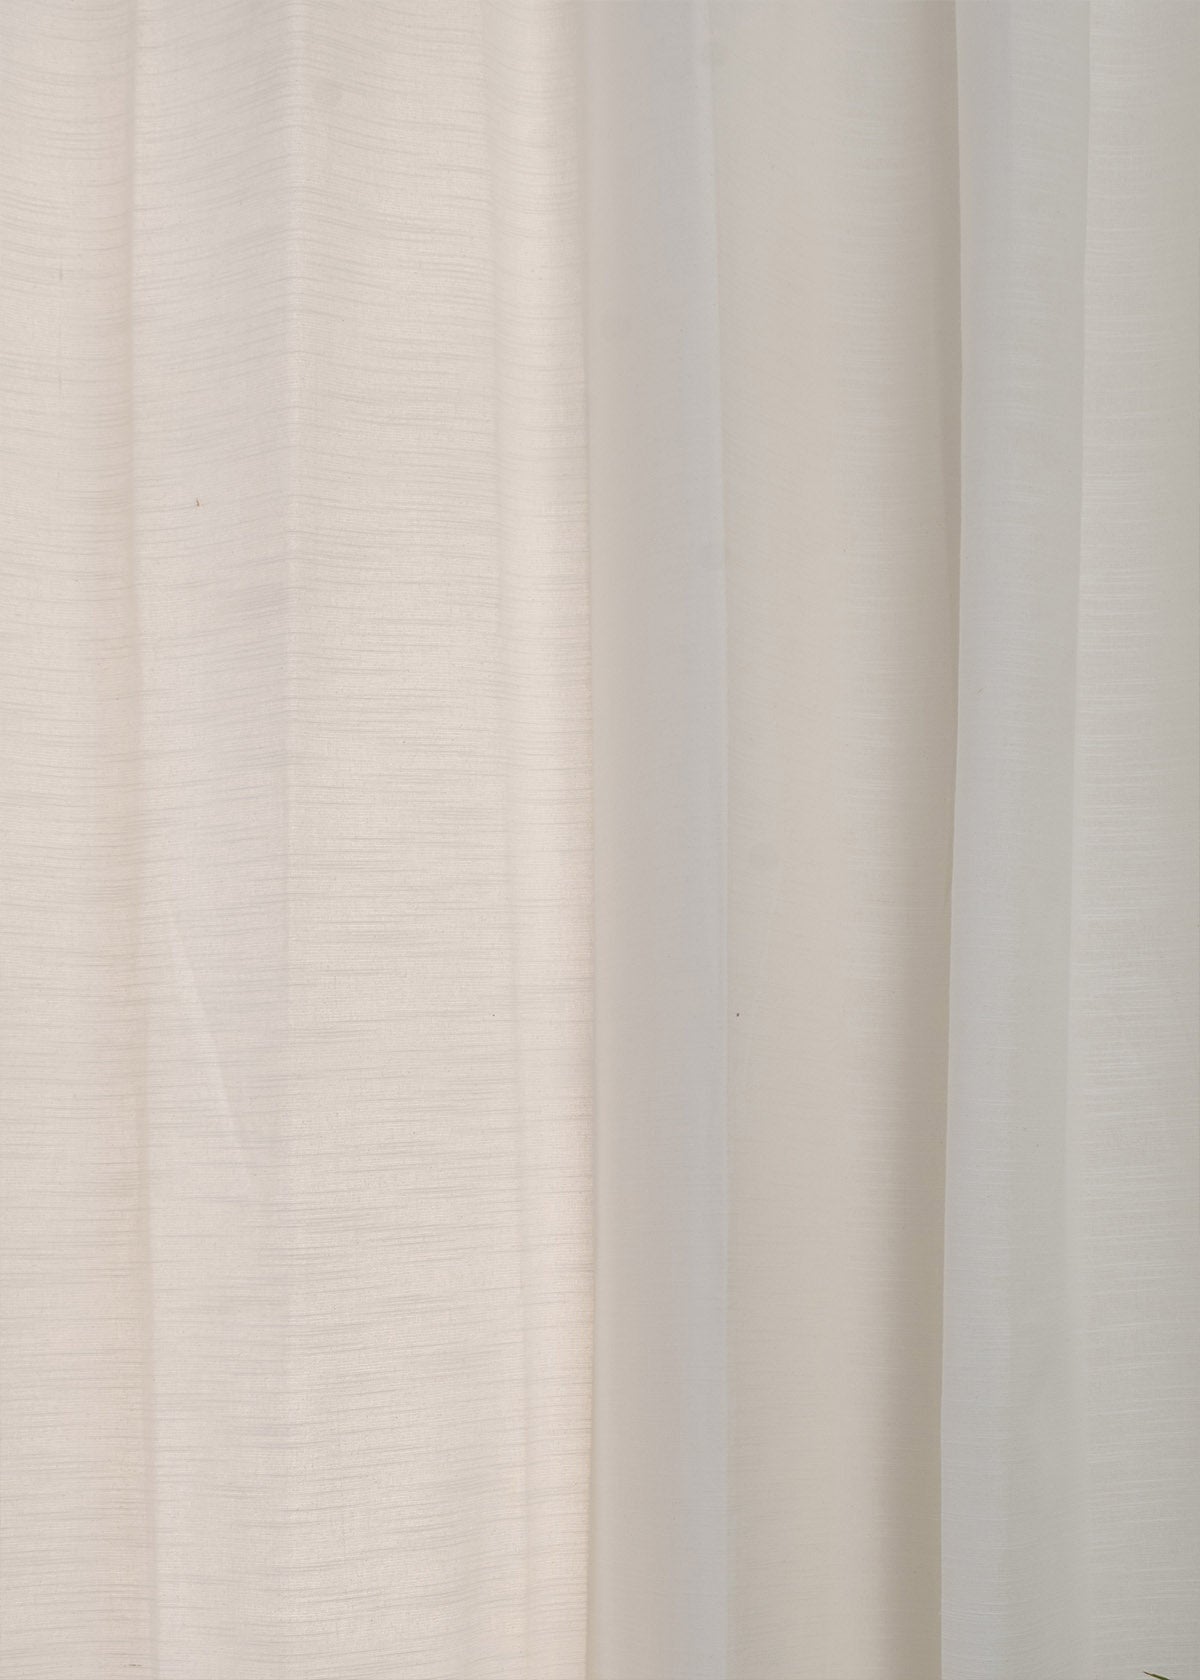 Solid white 100% Customizable Cotton plain curtain for bedroom - Room darkening